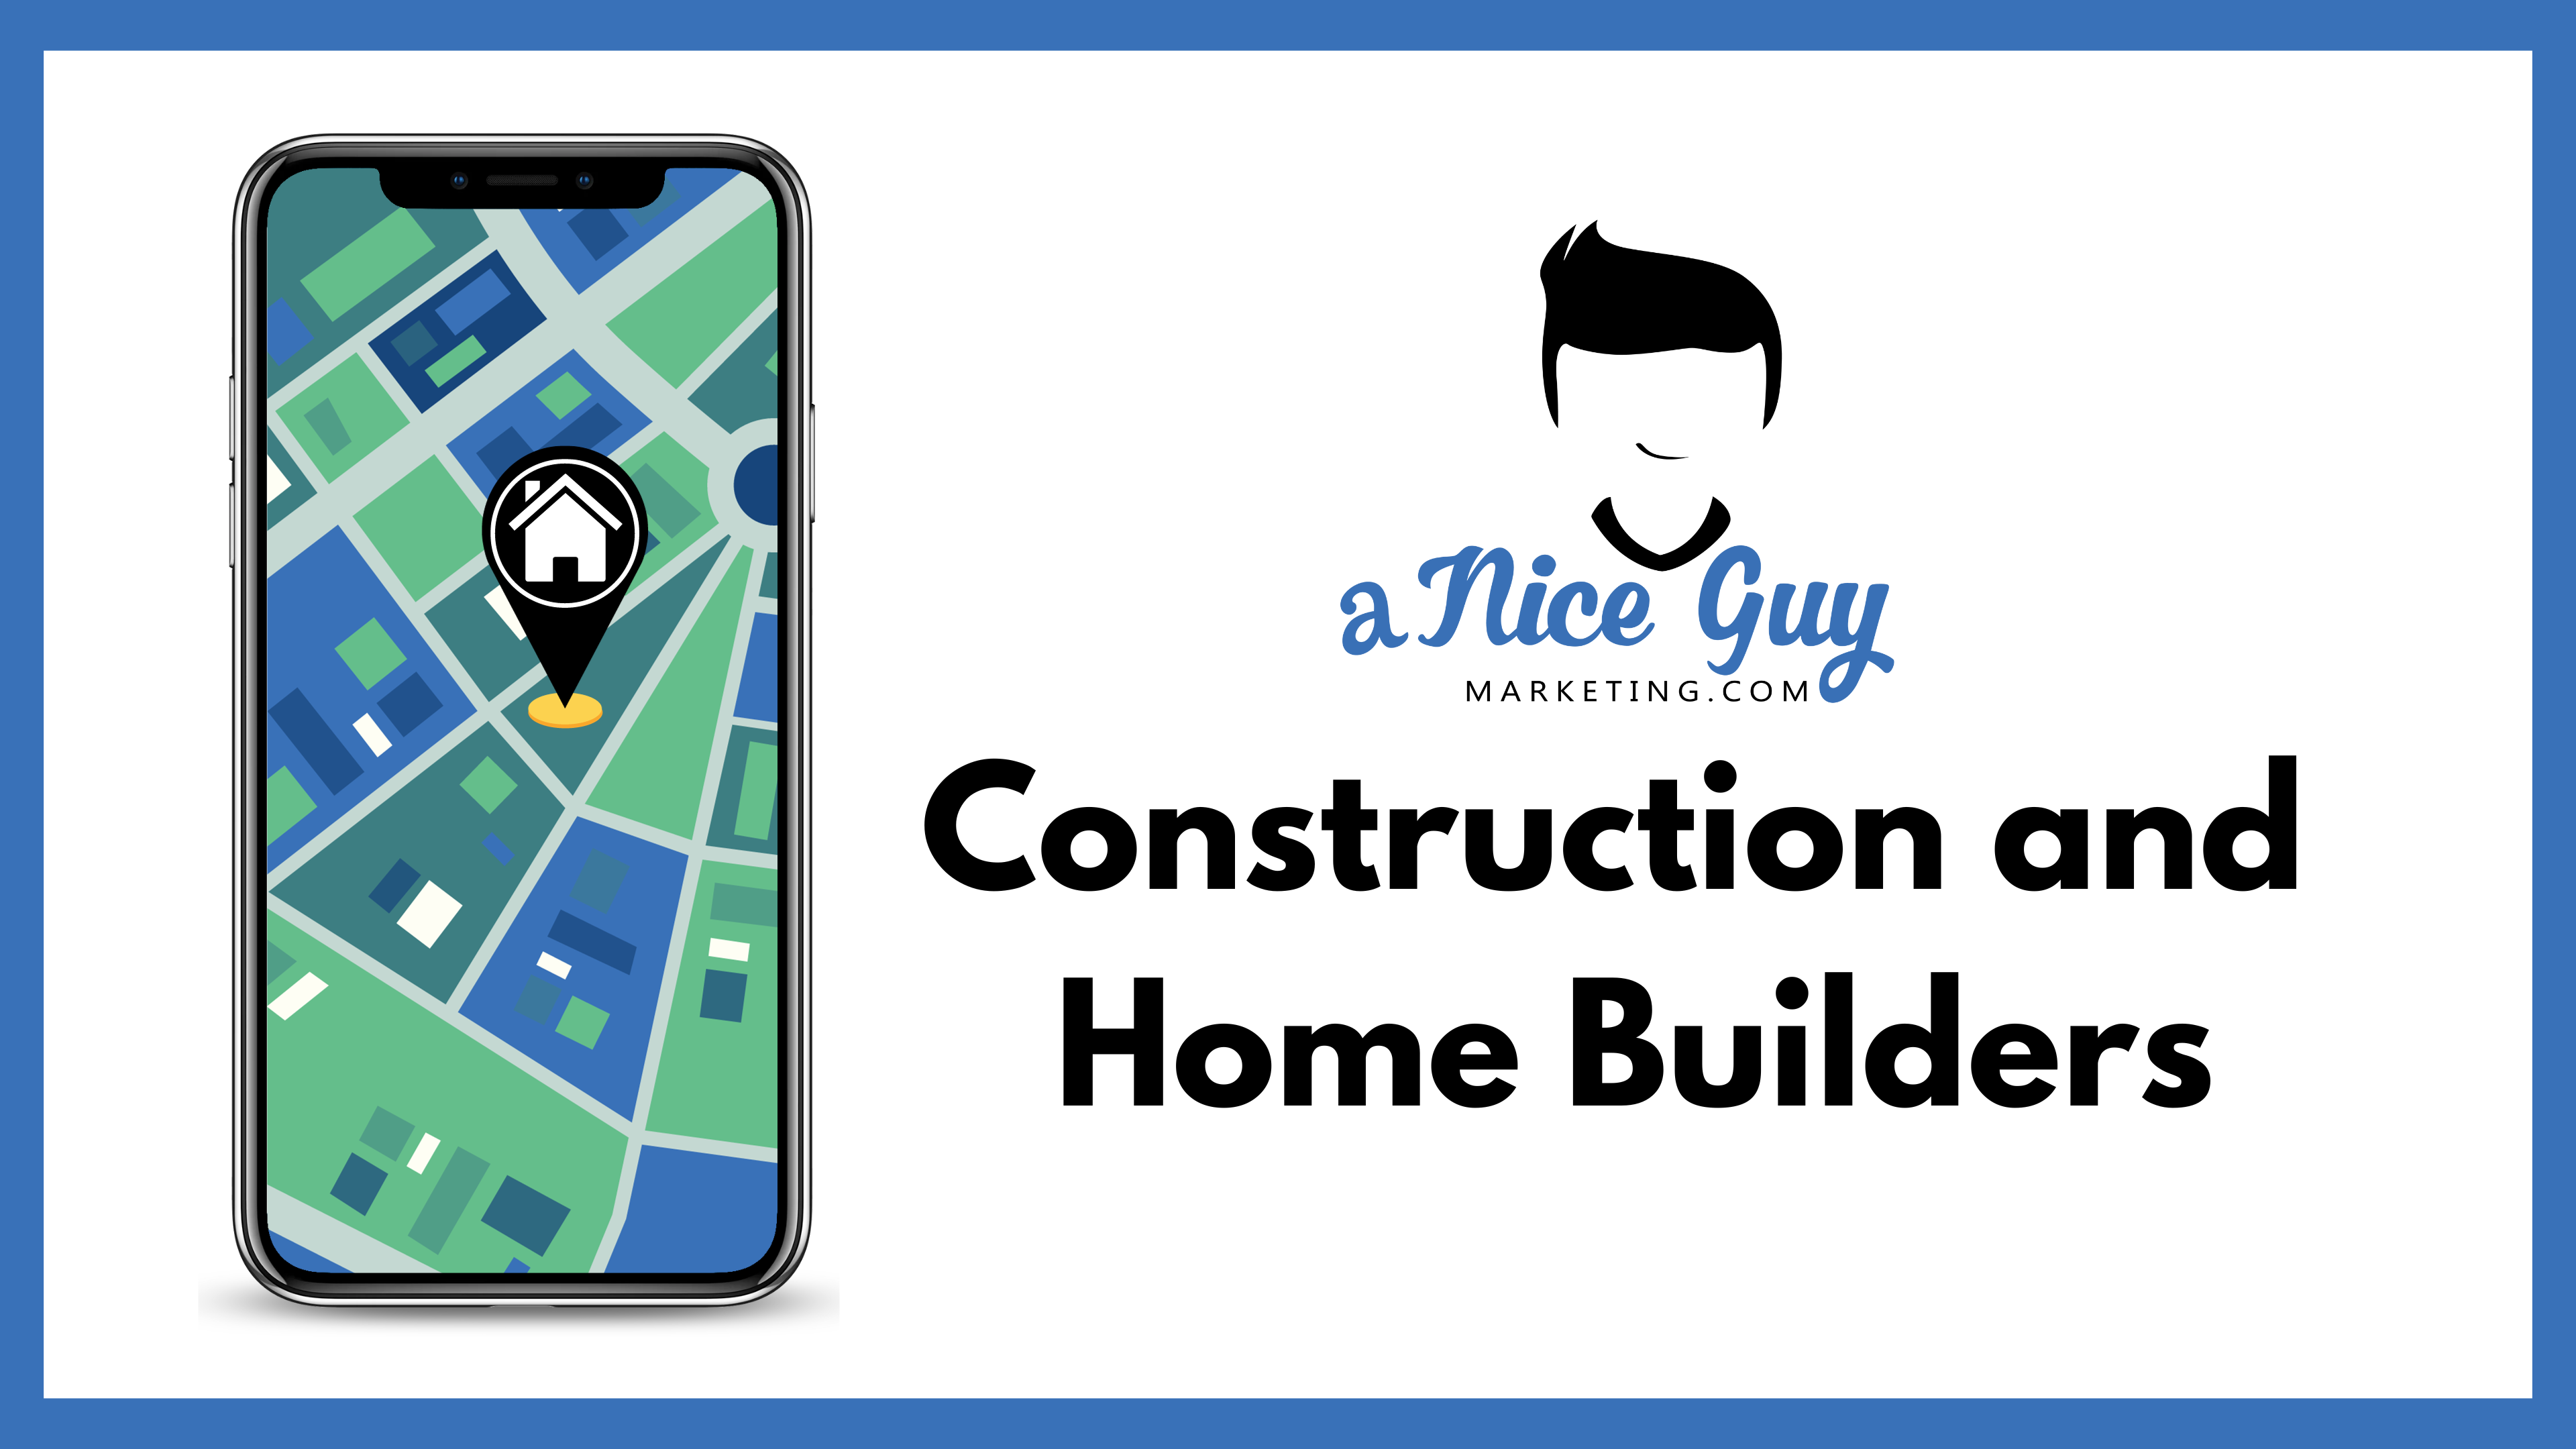 Geofencing for Construction & Home Builders